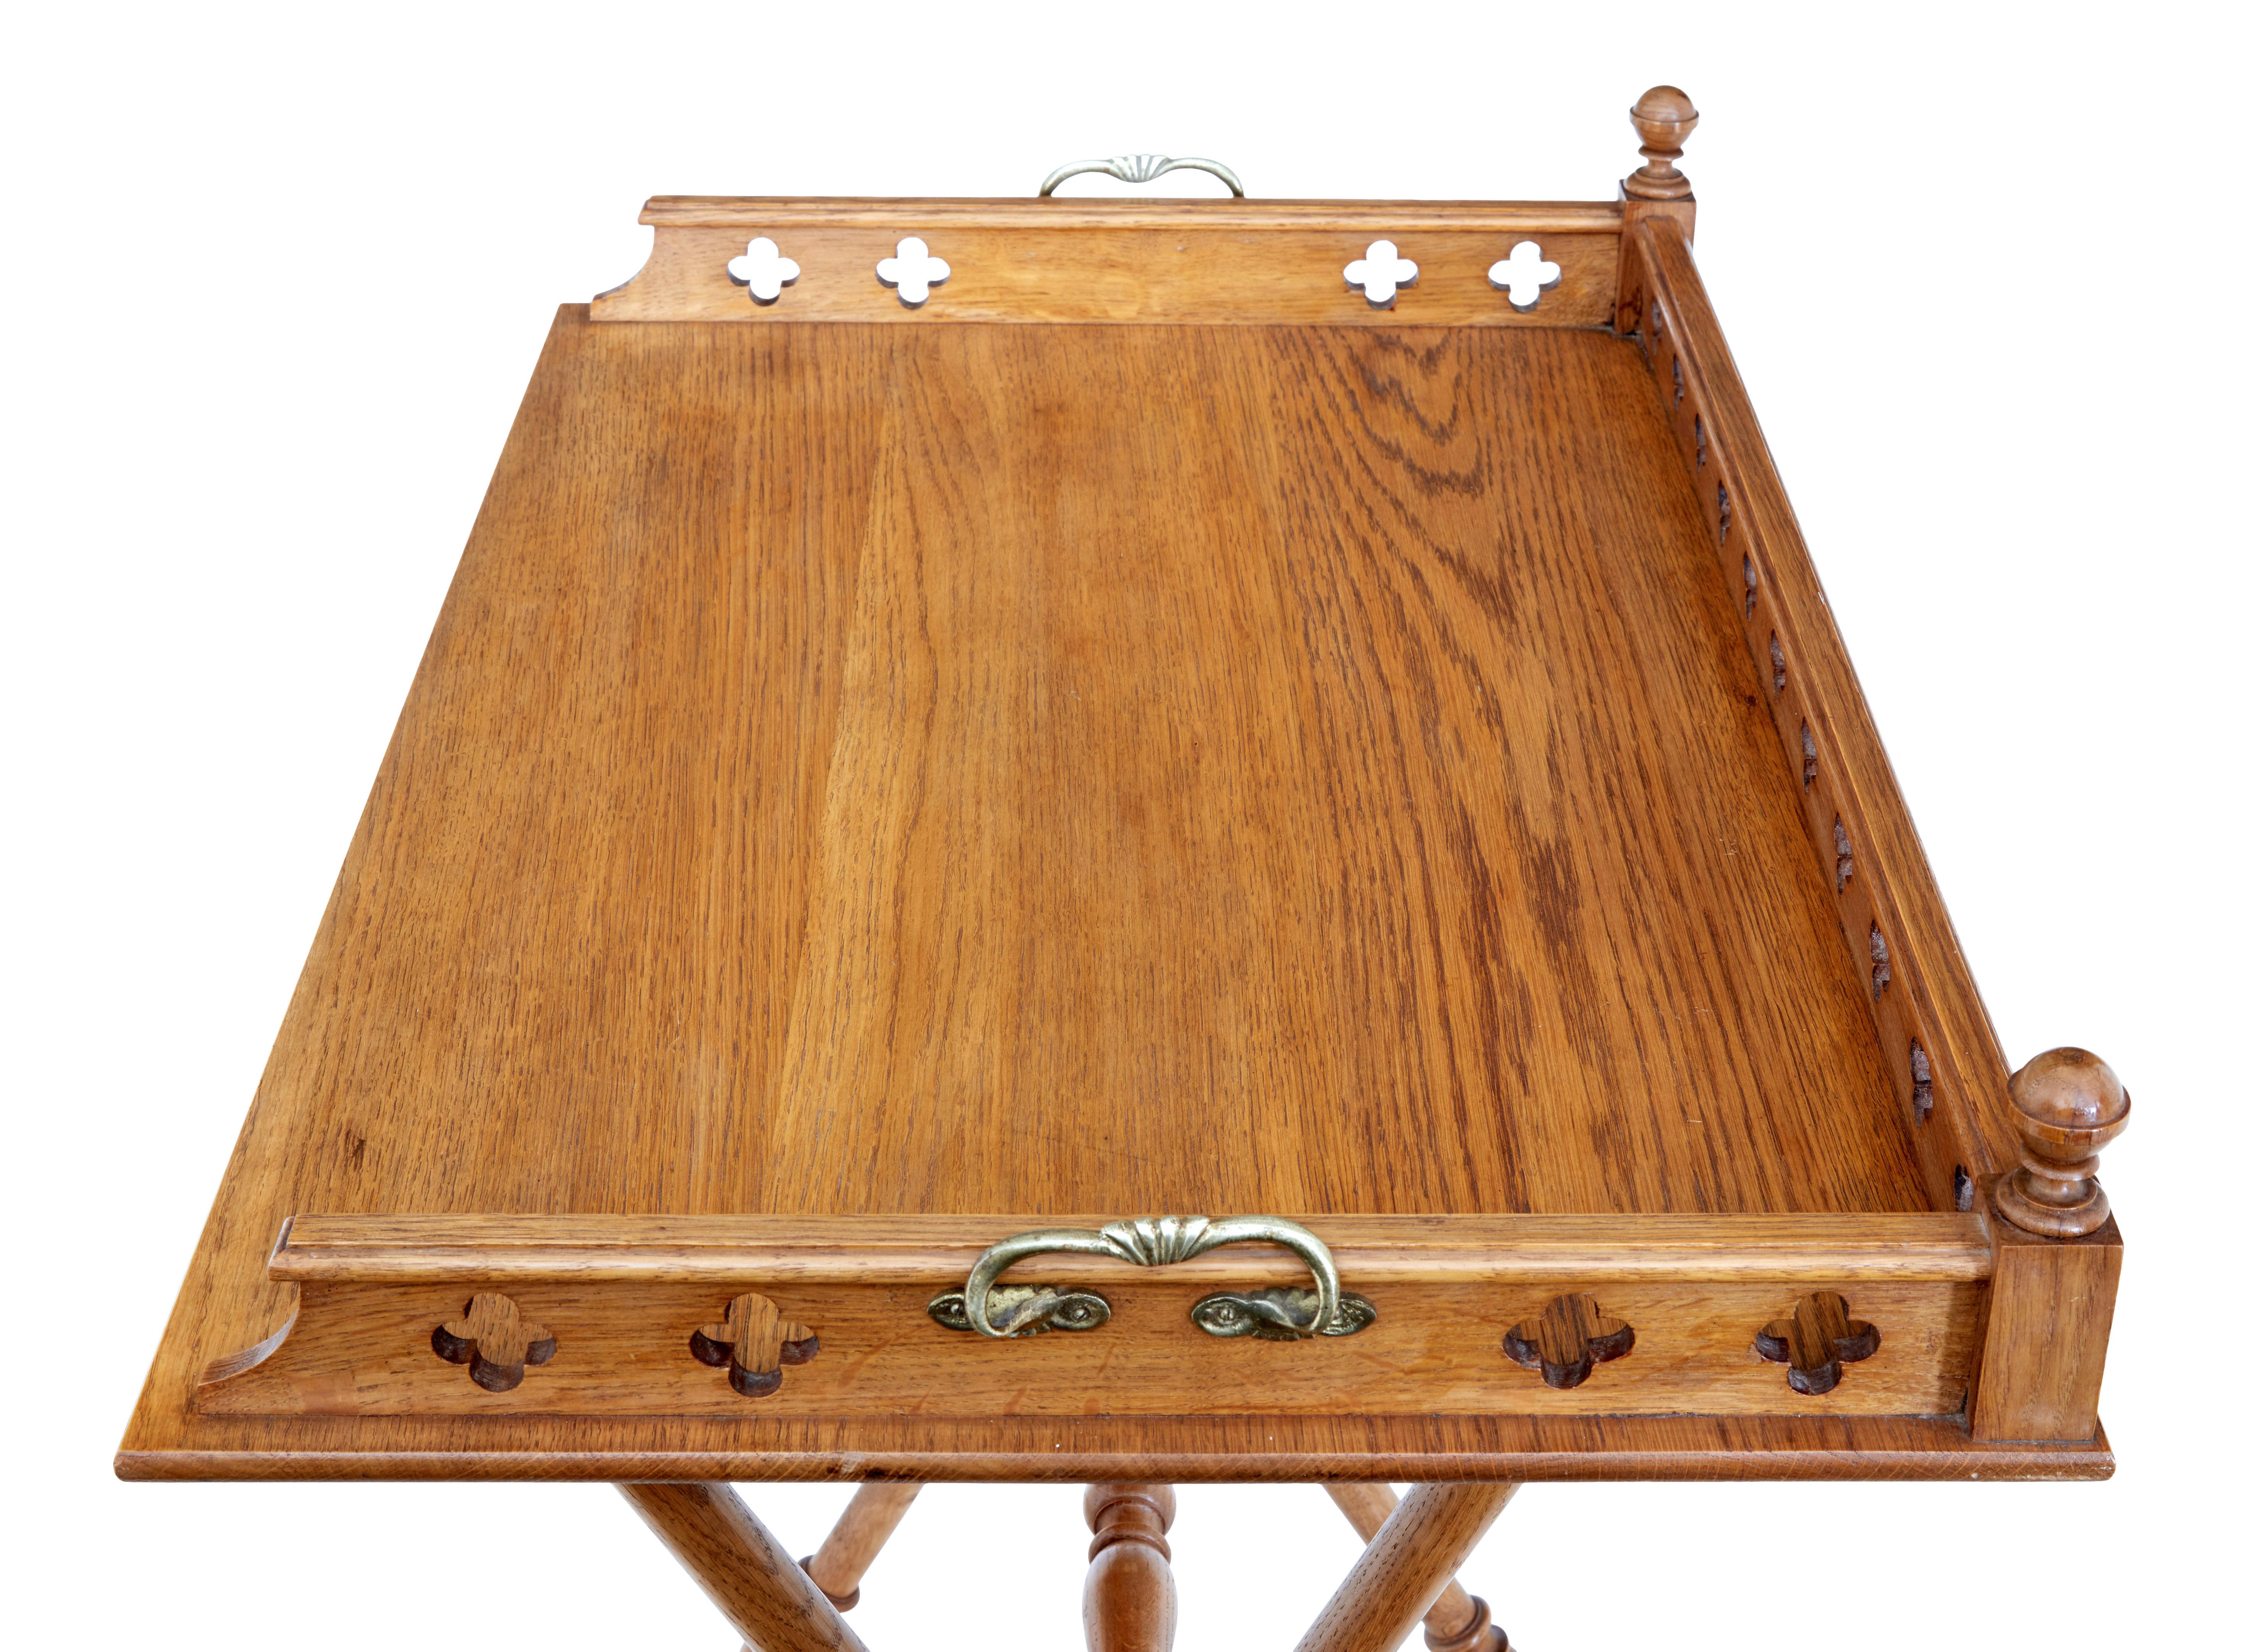 Early 20th century gothic revival oak butlers tray on stand circa 1910.

Good quality butler's tray on original stand.  Tray with tracery elements to the gallery, further decorated with turned finials and brass handles.  Tray stands on a profusely